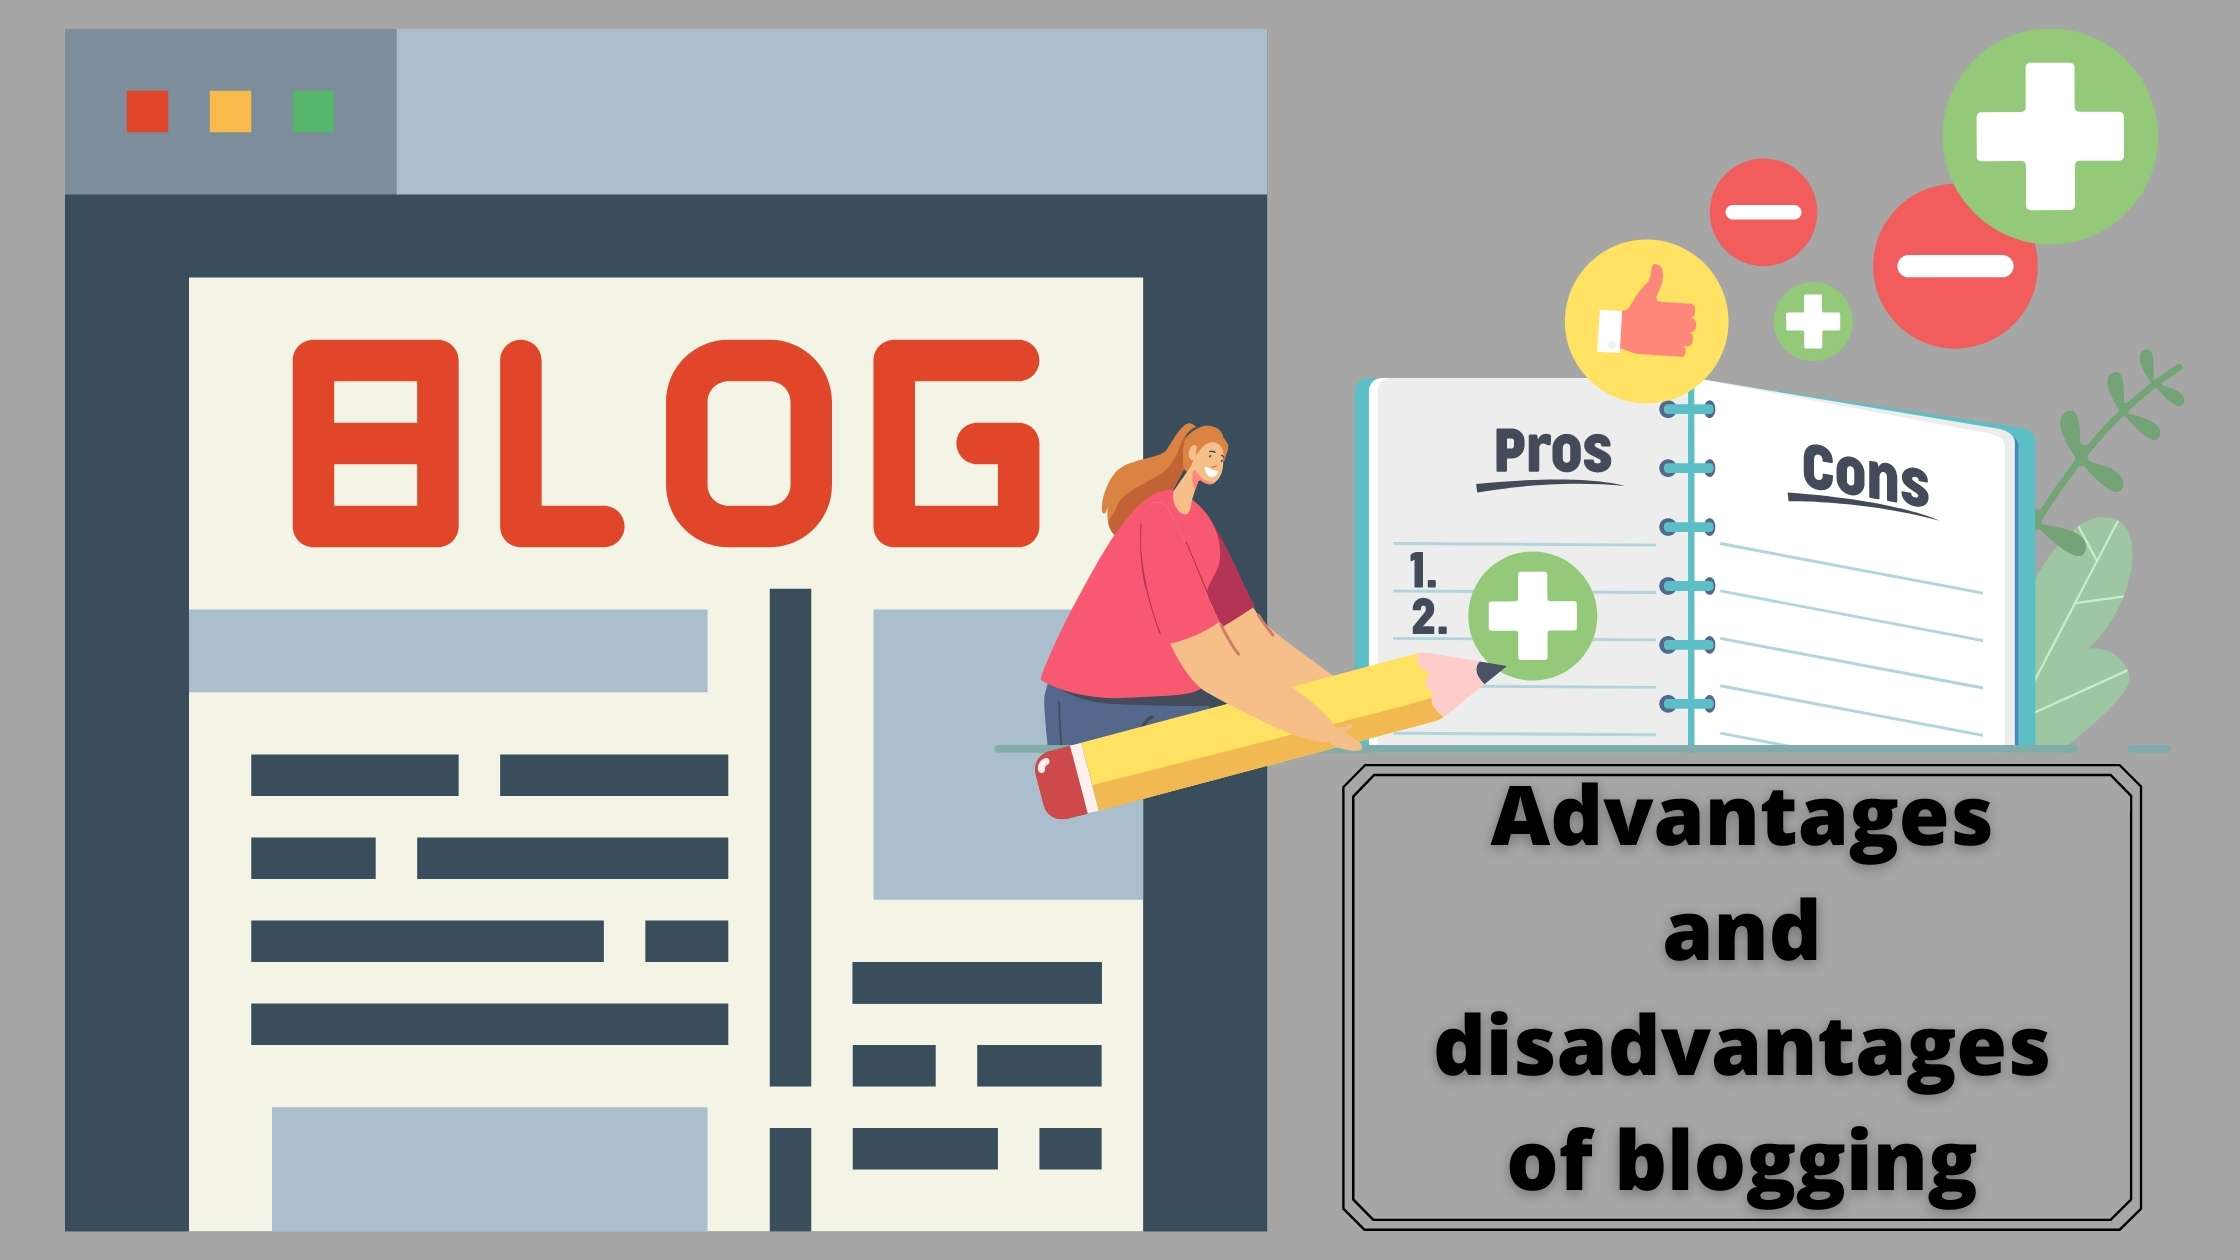 what do you think are the advantages and disadvantages of blogging